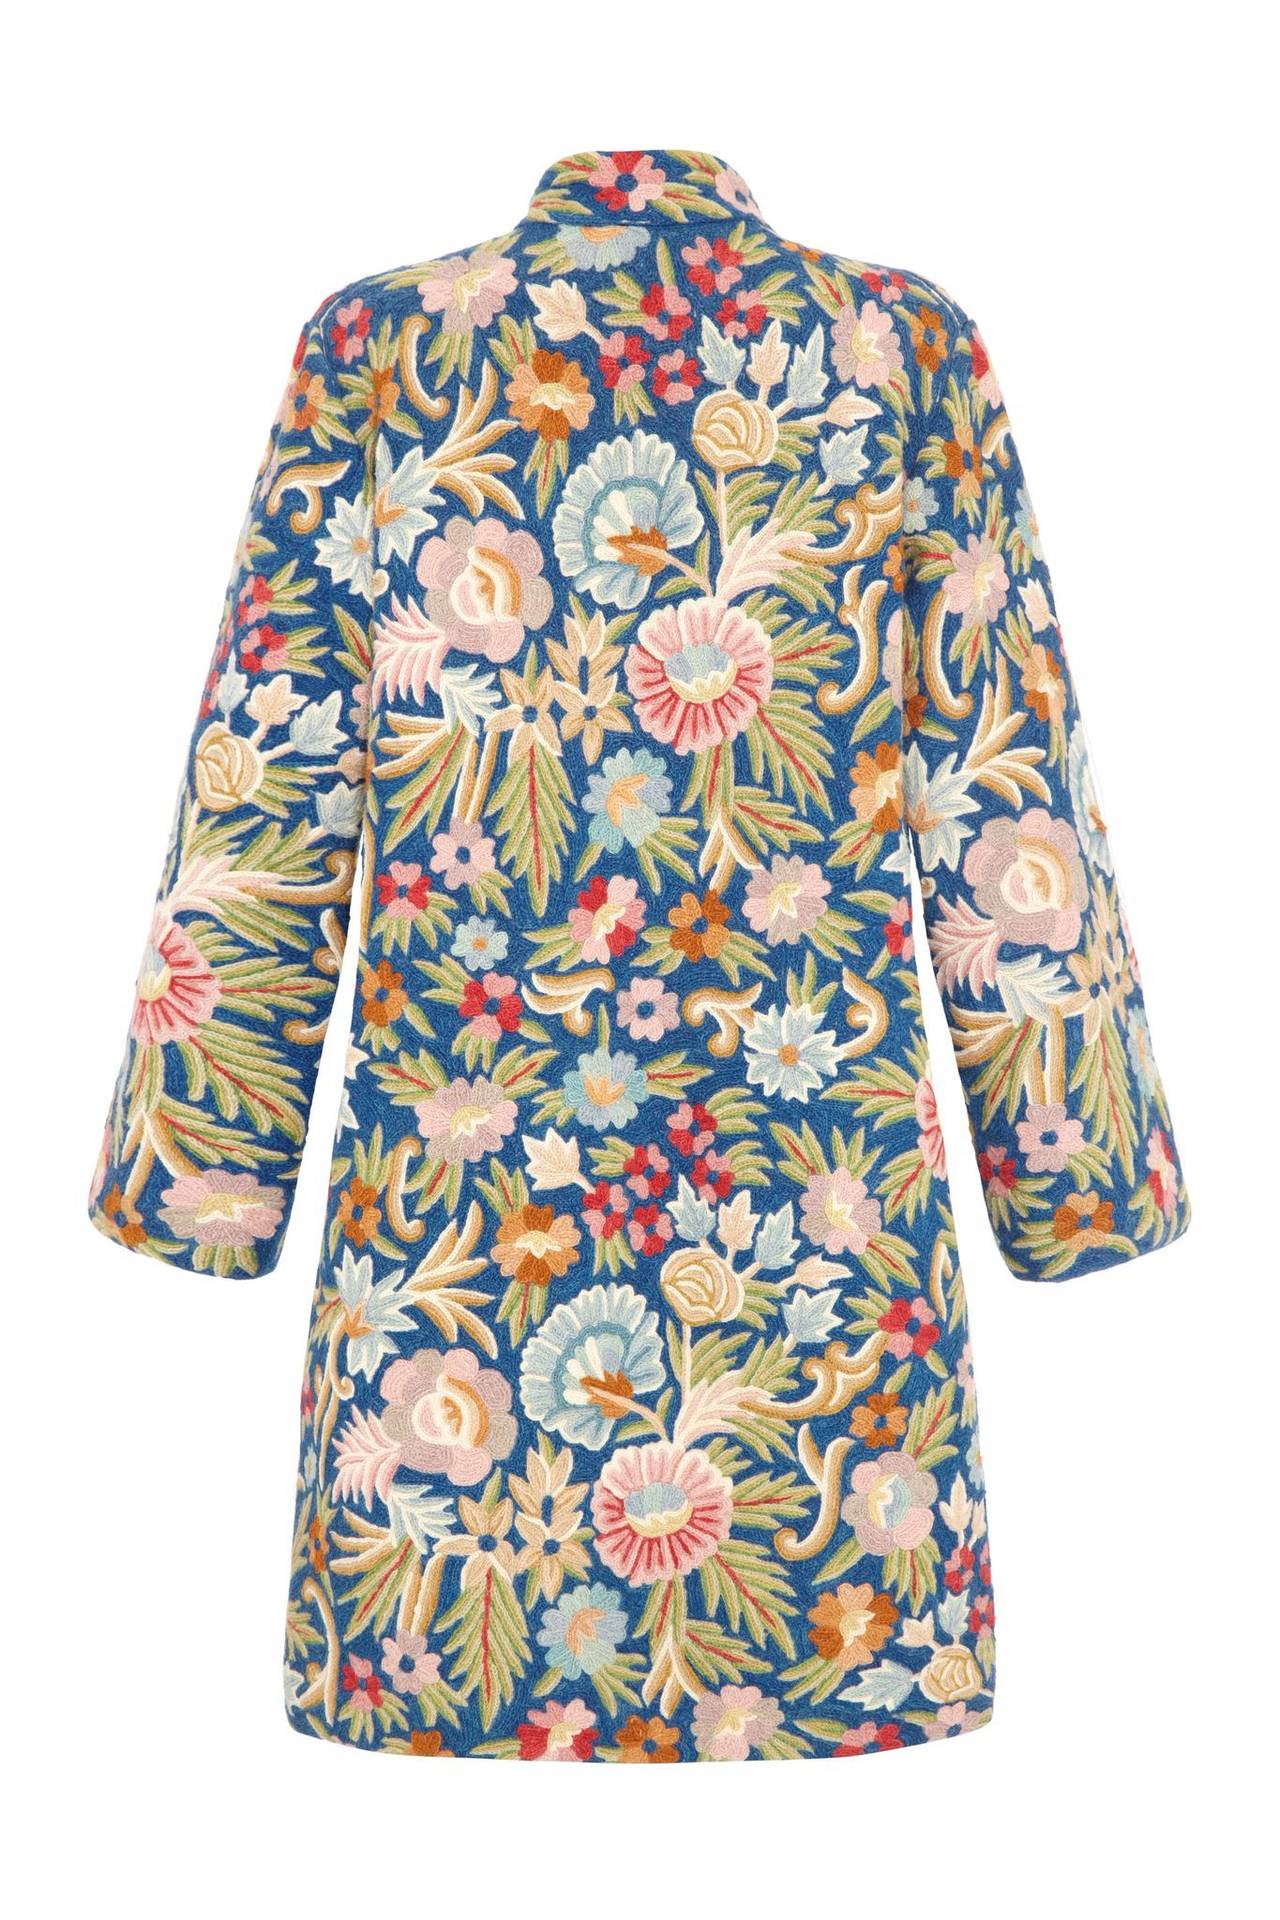 Amazing blue crewel work coat with hand embroidered pink, green and brown floral pattern. Very wearable with a mandarin collar and a slight A-line silhouette the coat has a lovely weight to it and could be worn all year round.  It is fully lined in